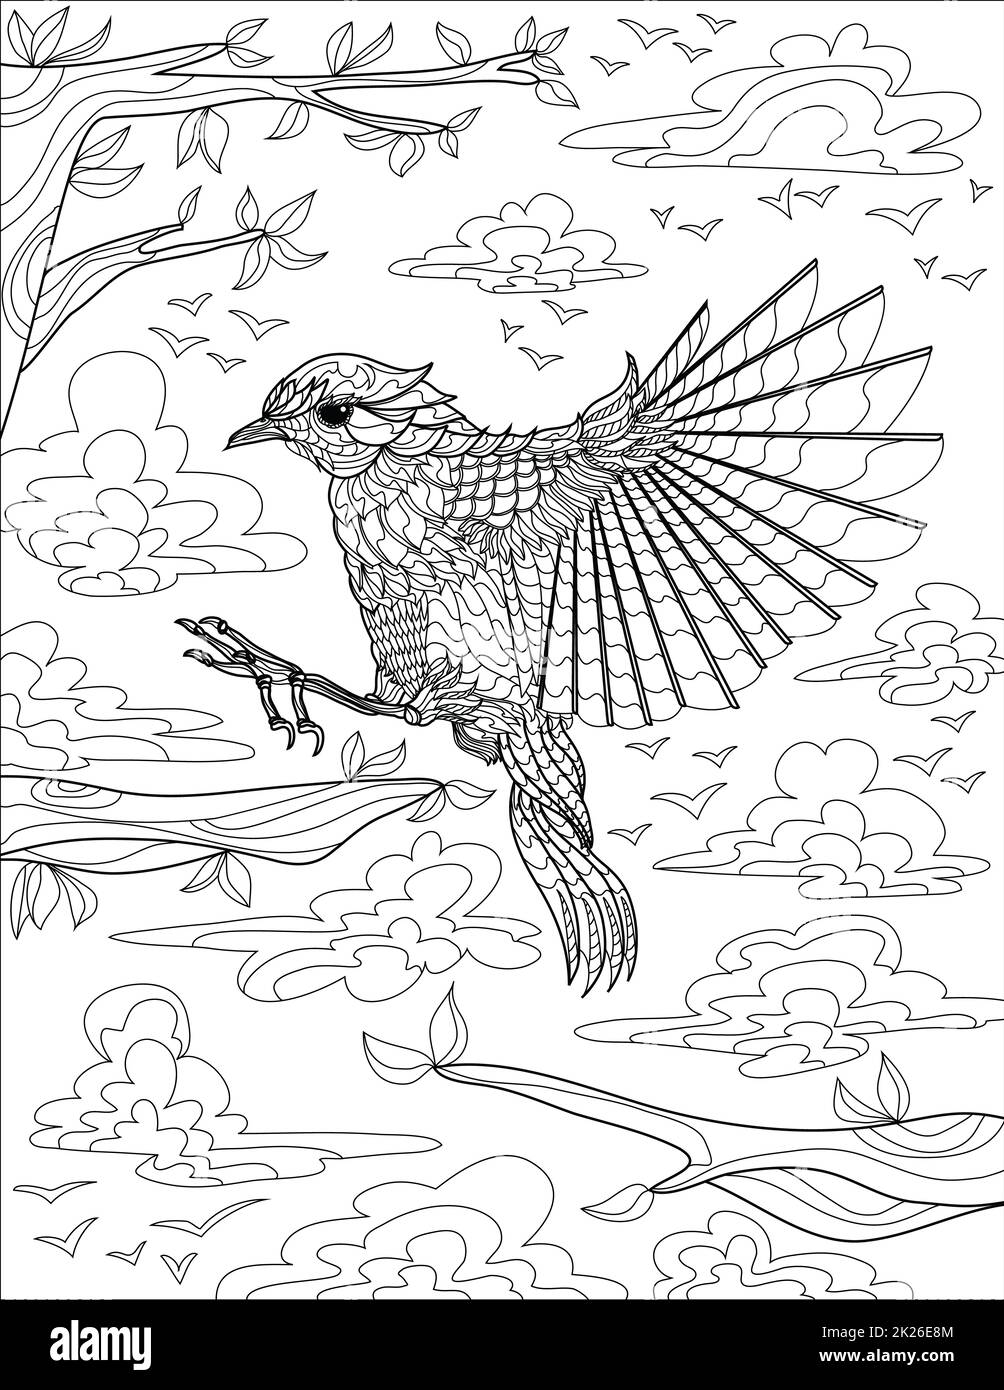 Hawk Line Drawing Landing On Tree Branch Surrounded With Clouds And Details Background Coloring Book Stock Photo